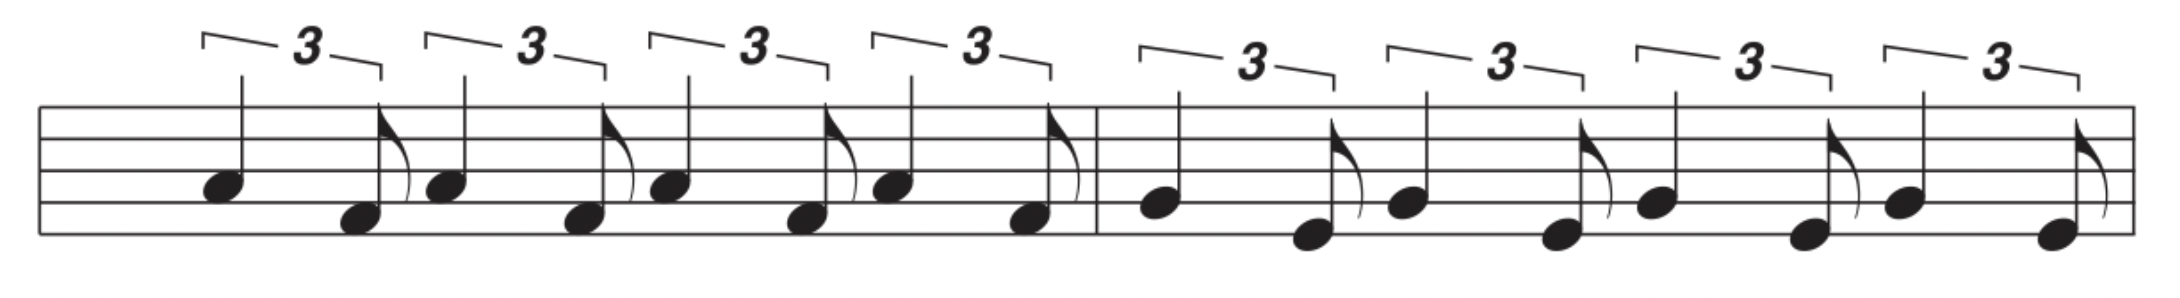 Swing Eighths are shown in musical notation.